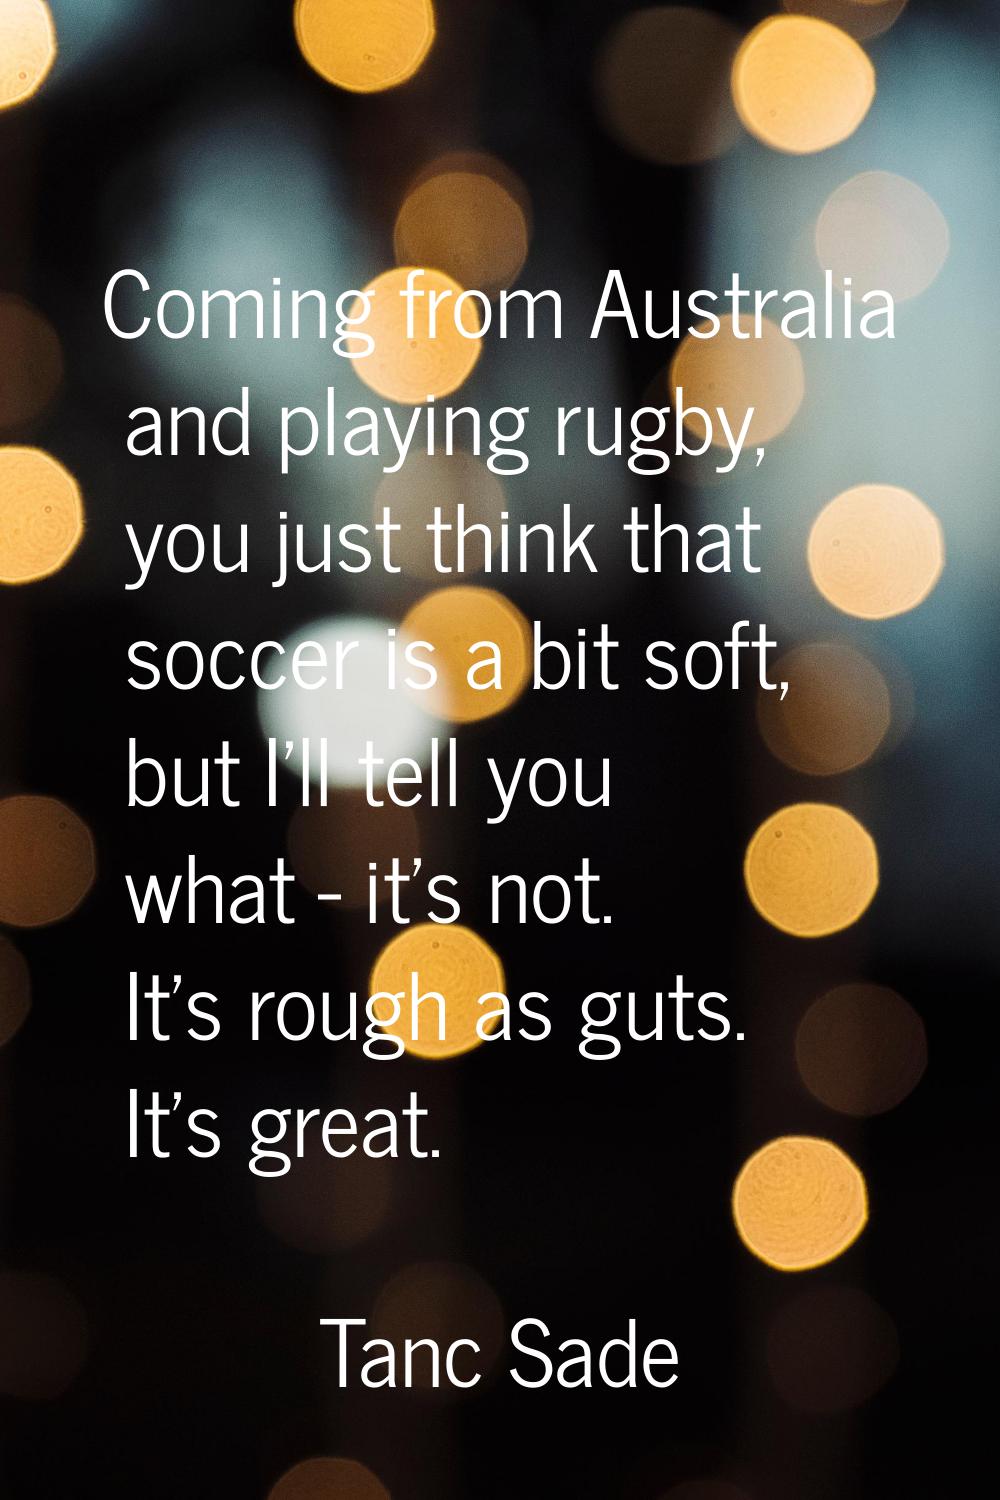 Coming from Australia and playing rugby, you just think that soccer is a bit soft, but I'll tell yo